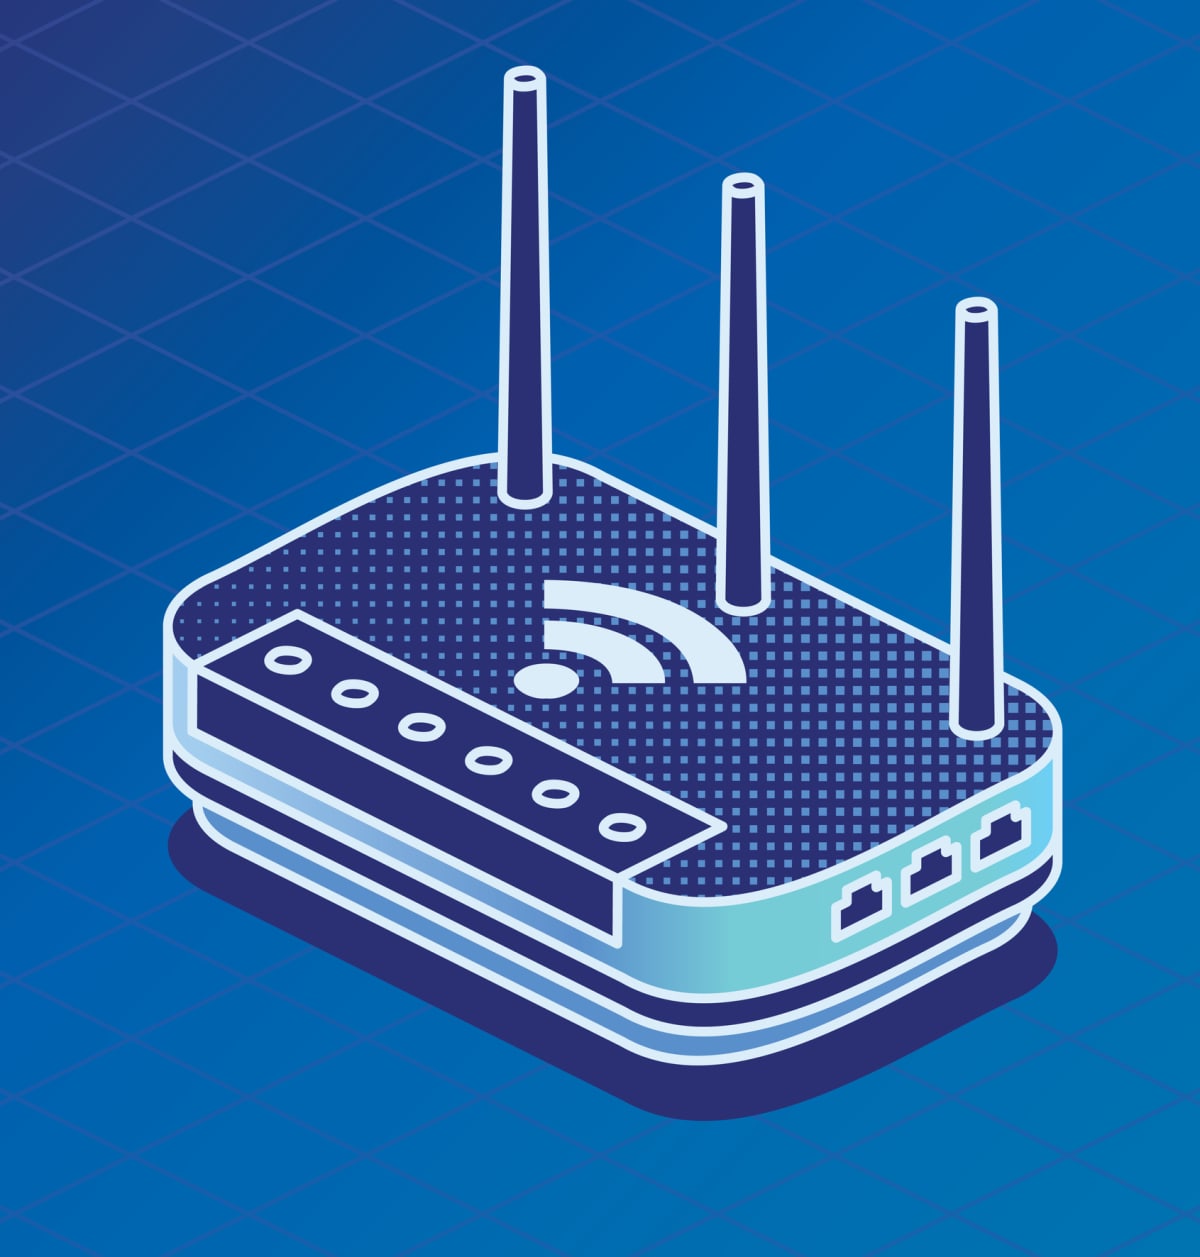 Isometric Network Router. Vector Illustration. Outline Wifi Wireless Router with Antennas on Blue Background.